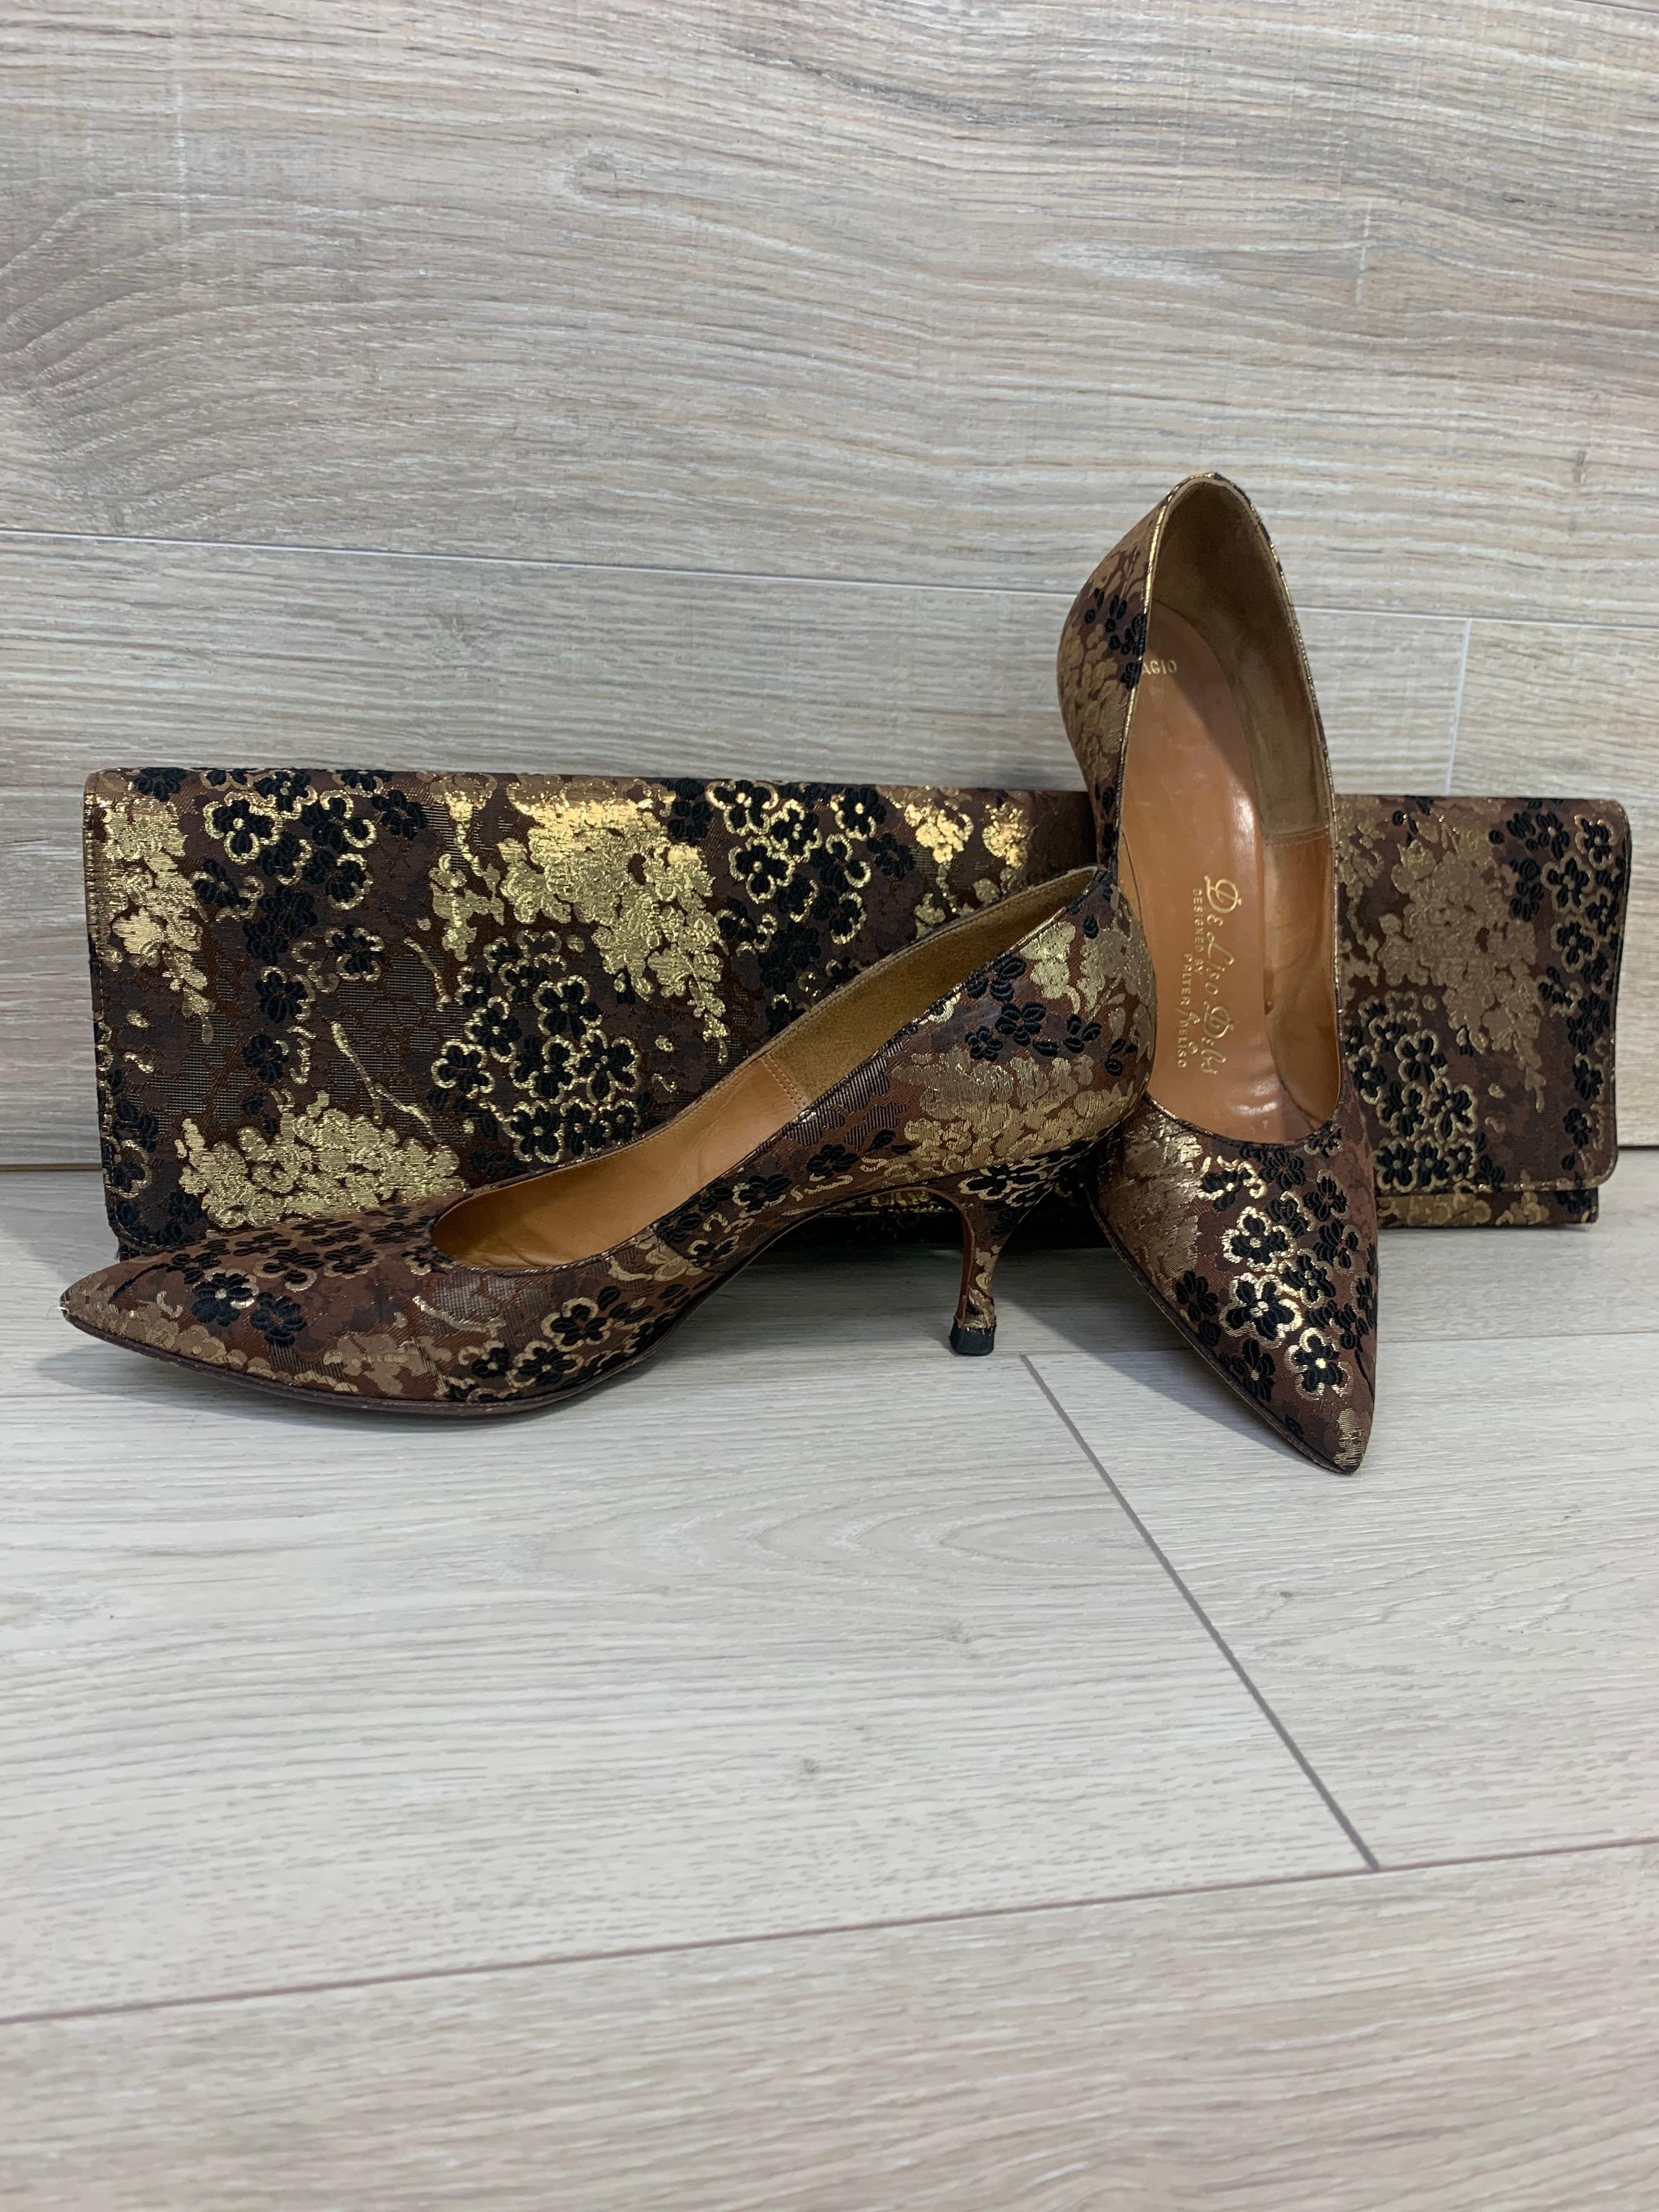 1960 DeLiso Debs Chocolate & Gold Silk Brocade Stiletto Heels and Dramatic Lennox Envelope Clutch: Classic pointed toe stilettos with matching extra-long clutch!  2 closures and a zippered pocket in clutch. Shoes are size 9AA. 